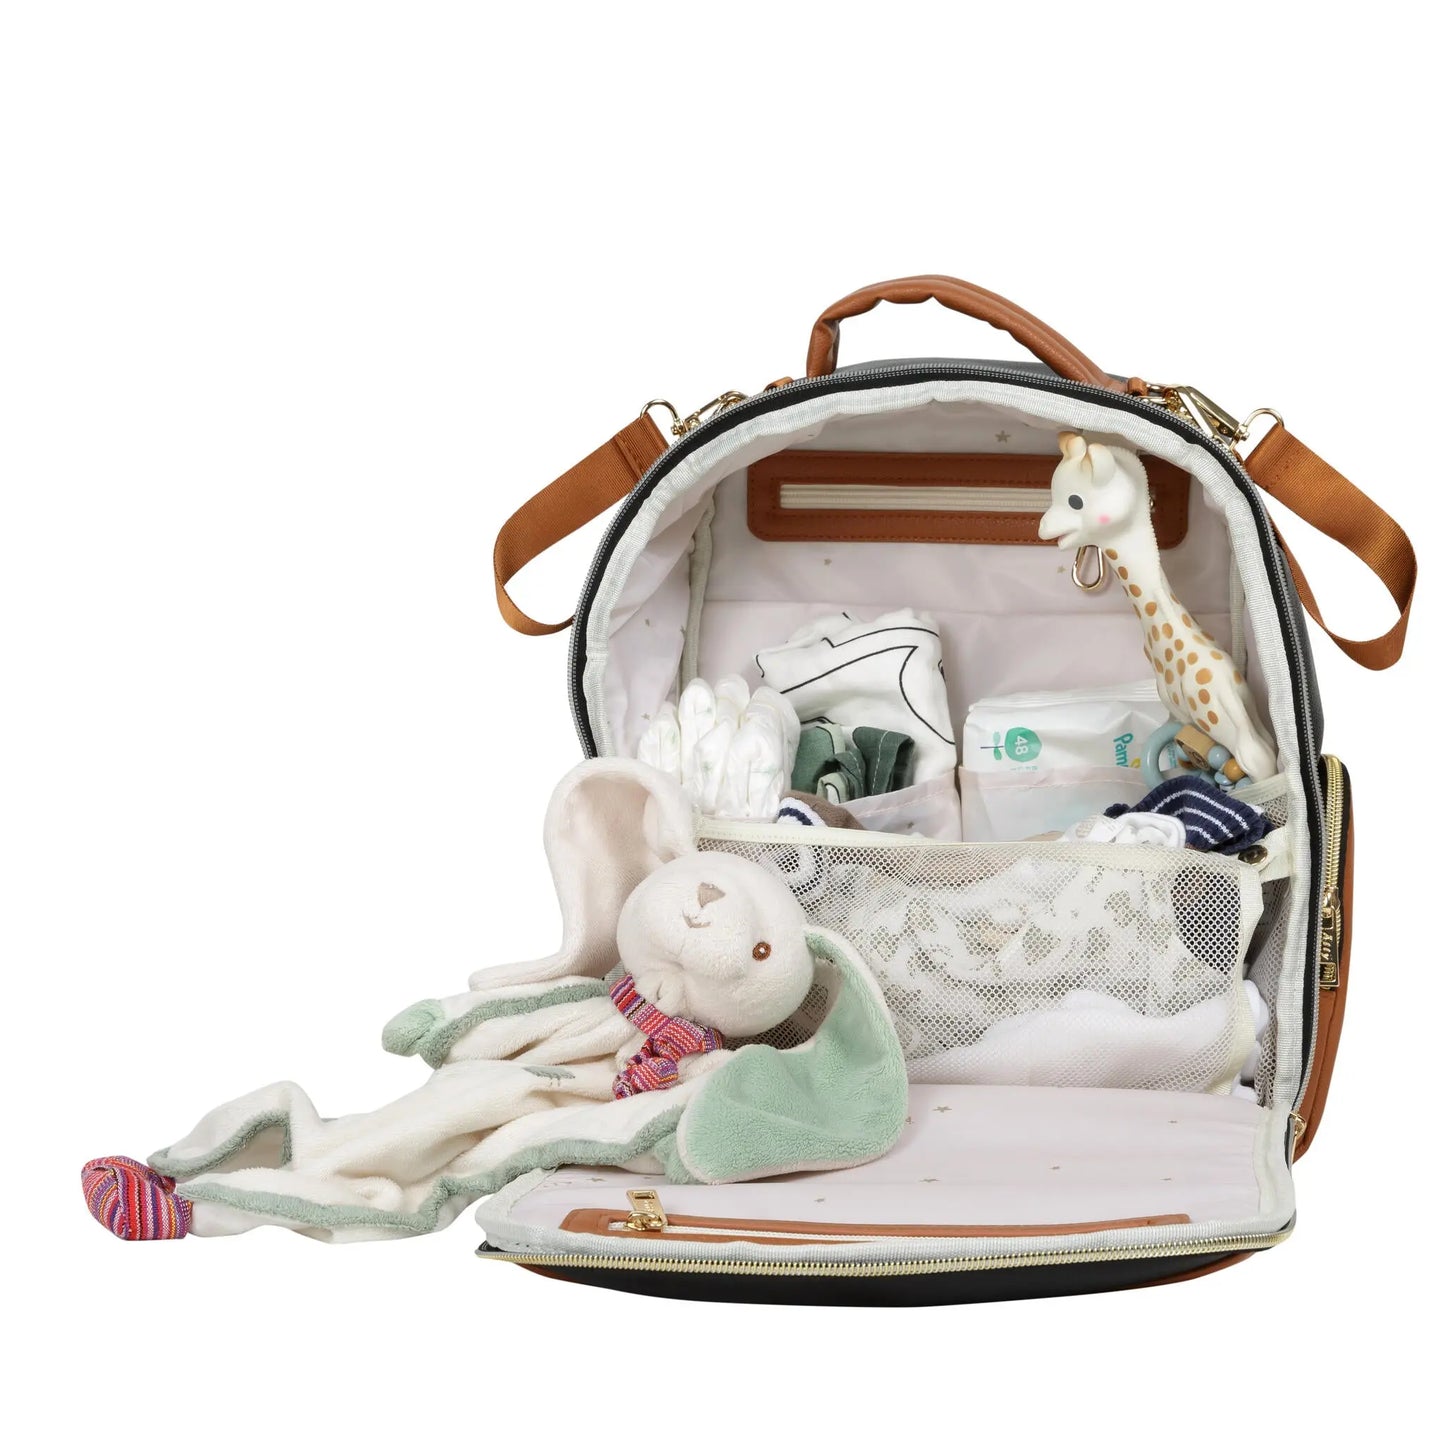 A black coffee diaper bag with toys, clothes, and a giraffe toy in a purse. Features multiple pockets, laptop pocket, stroller straps, and thermal-lined compartments for convenience on the go.